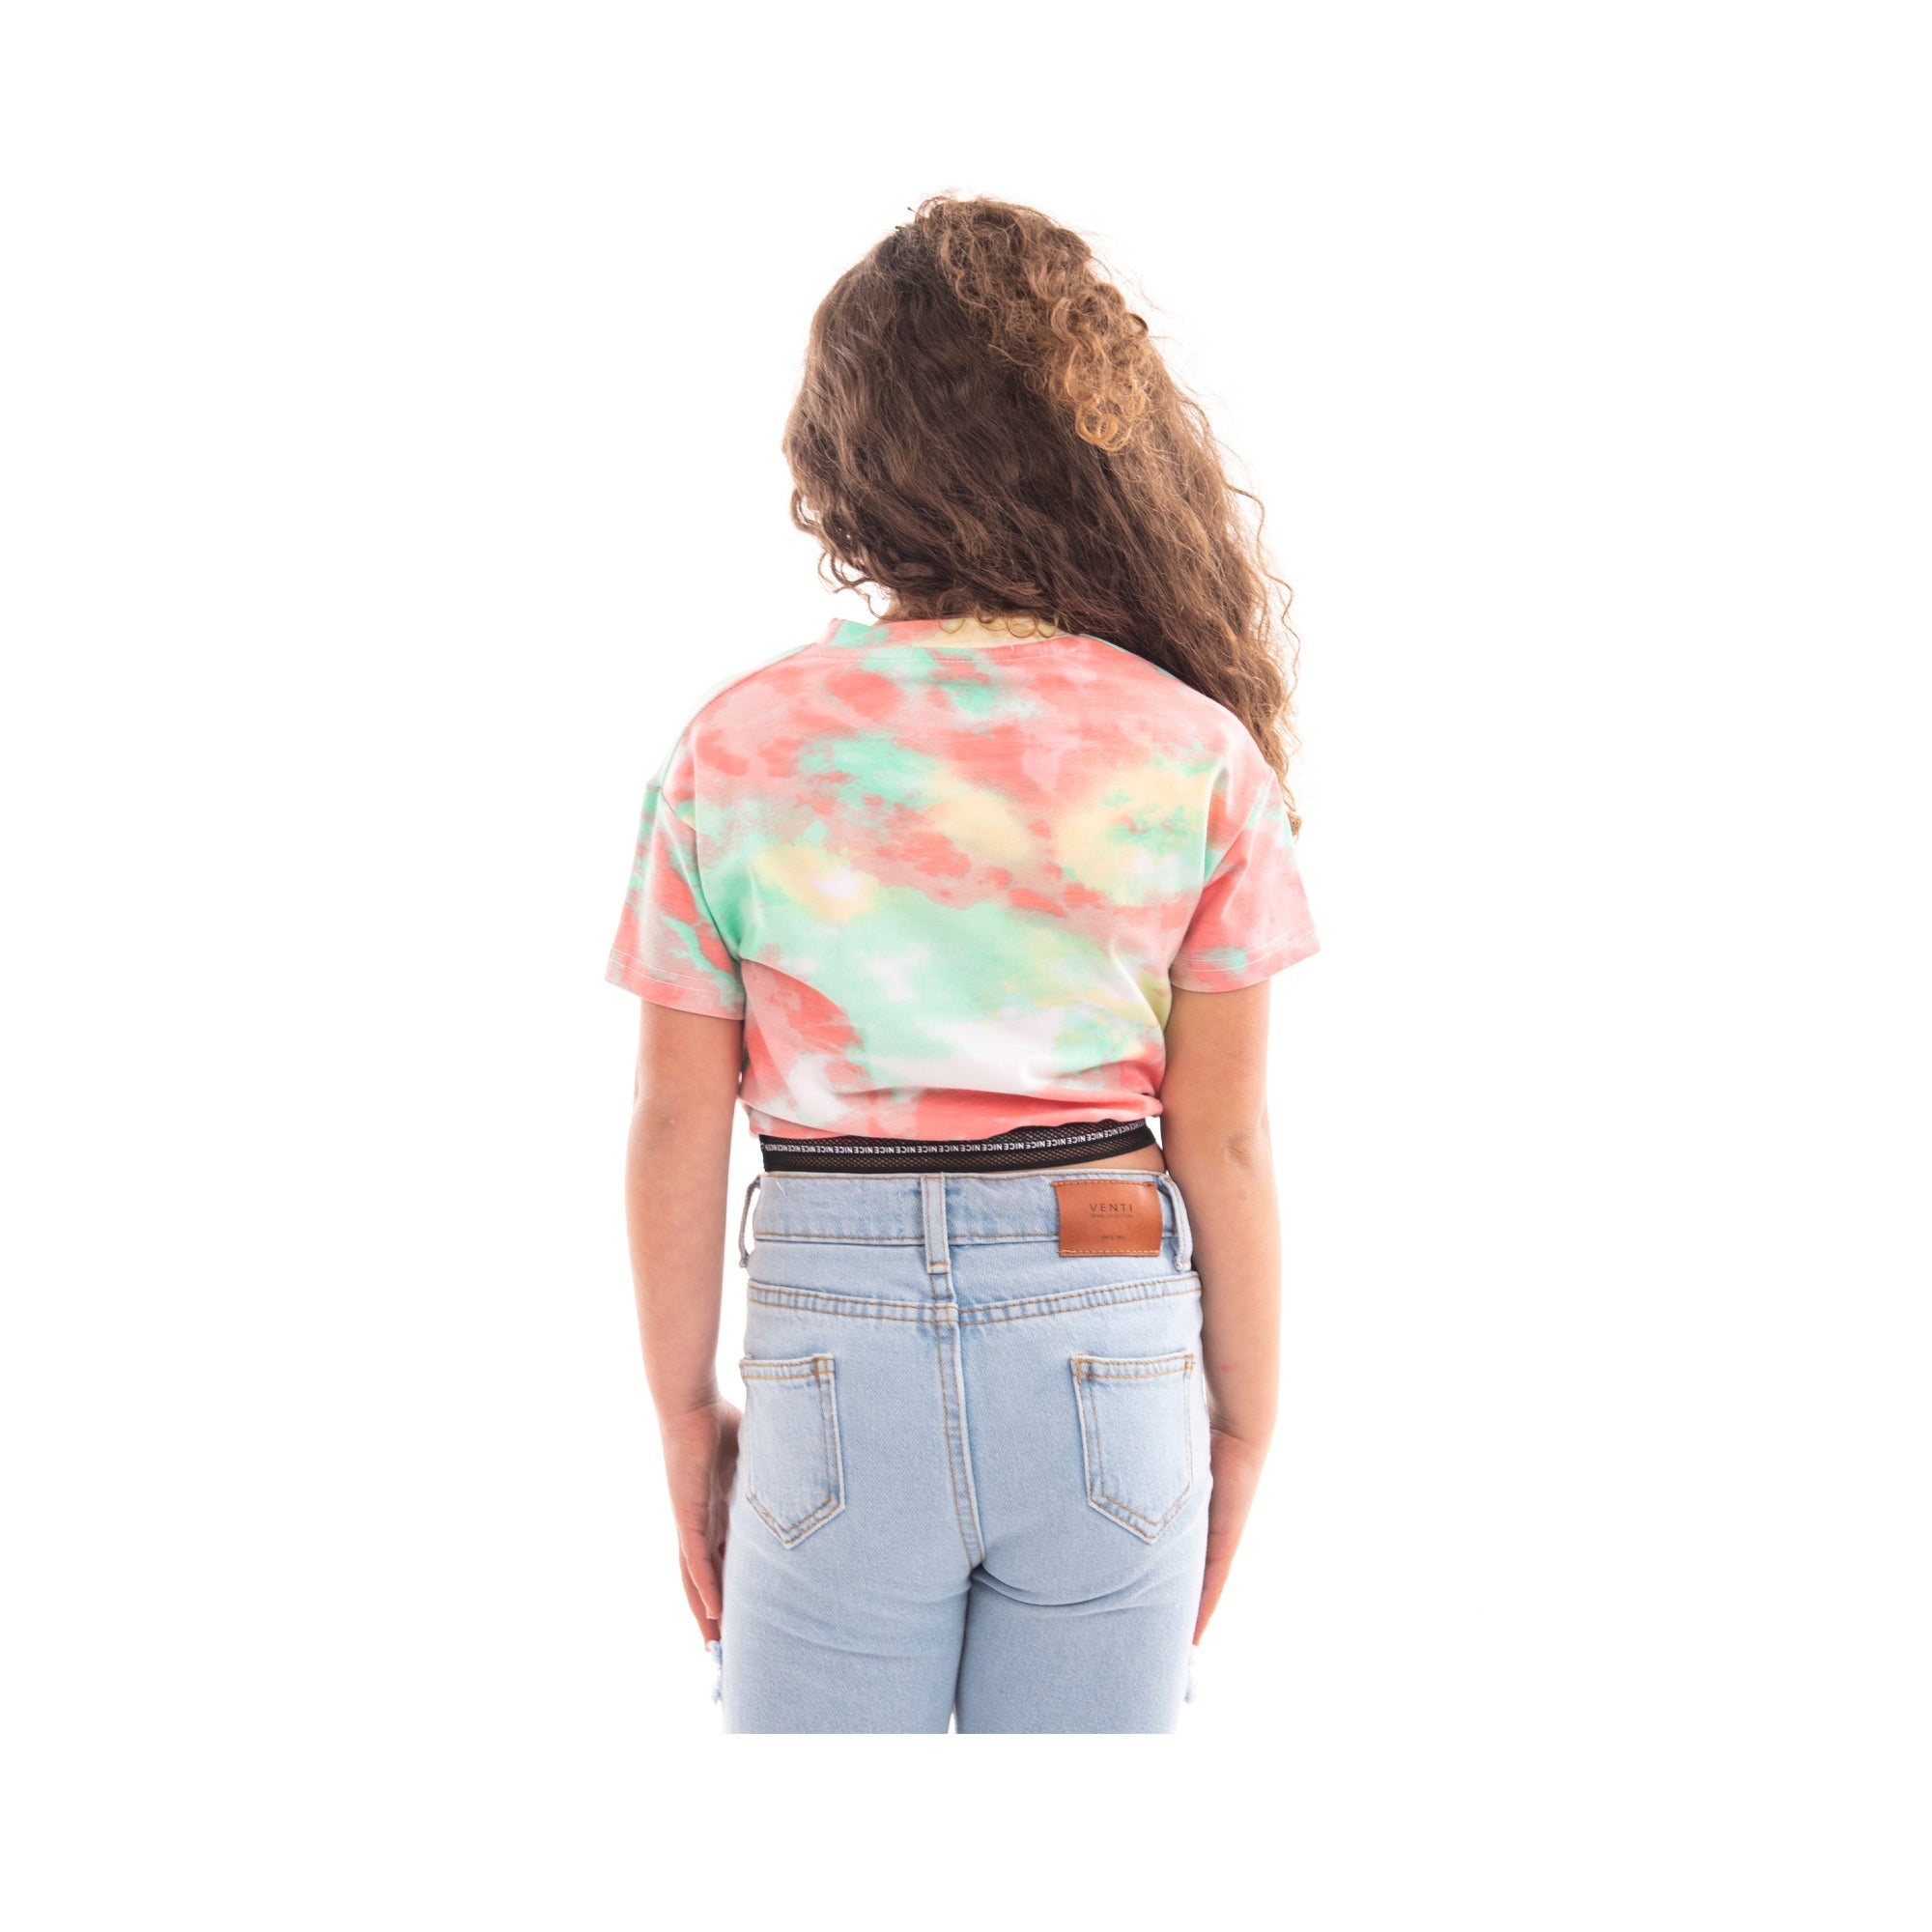 Venti Tie Dye Crop Top with Text for Girl 404047, Target Gender: Girls, Color Family: Multicolor, Material: Mixed Materials, Target Age: 12 - 18 Months, 2 image